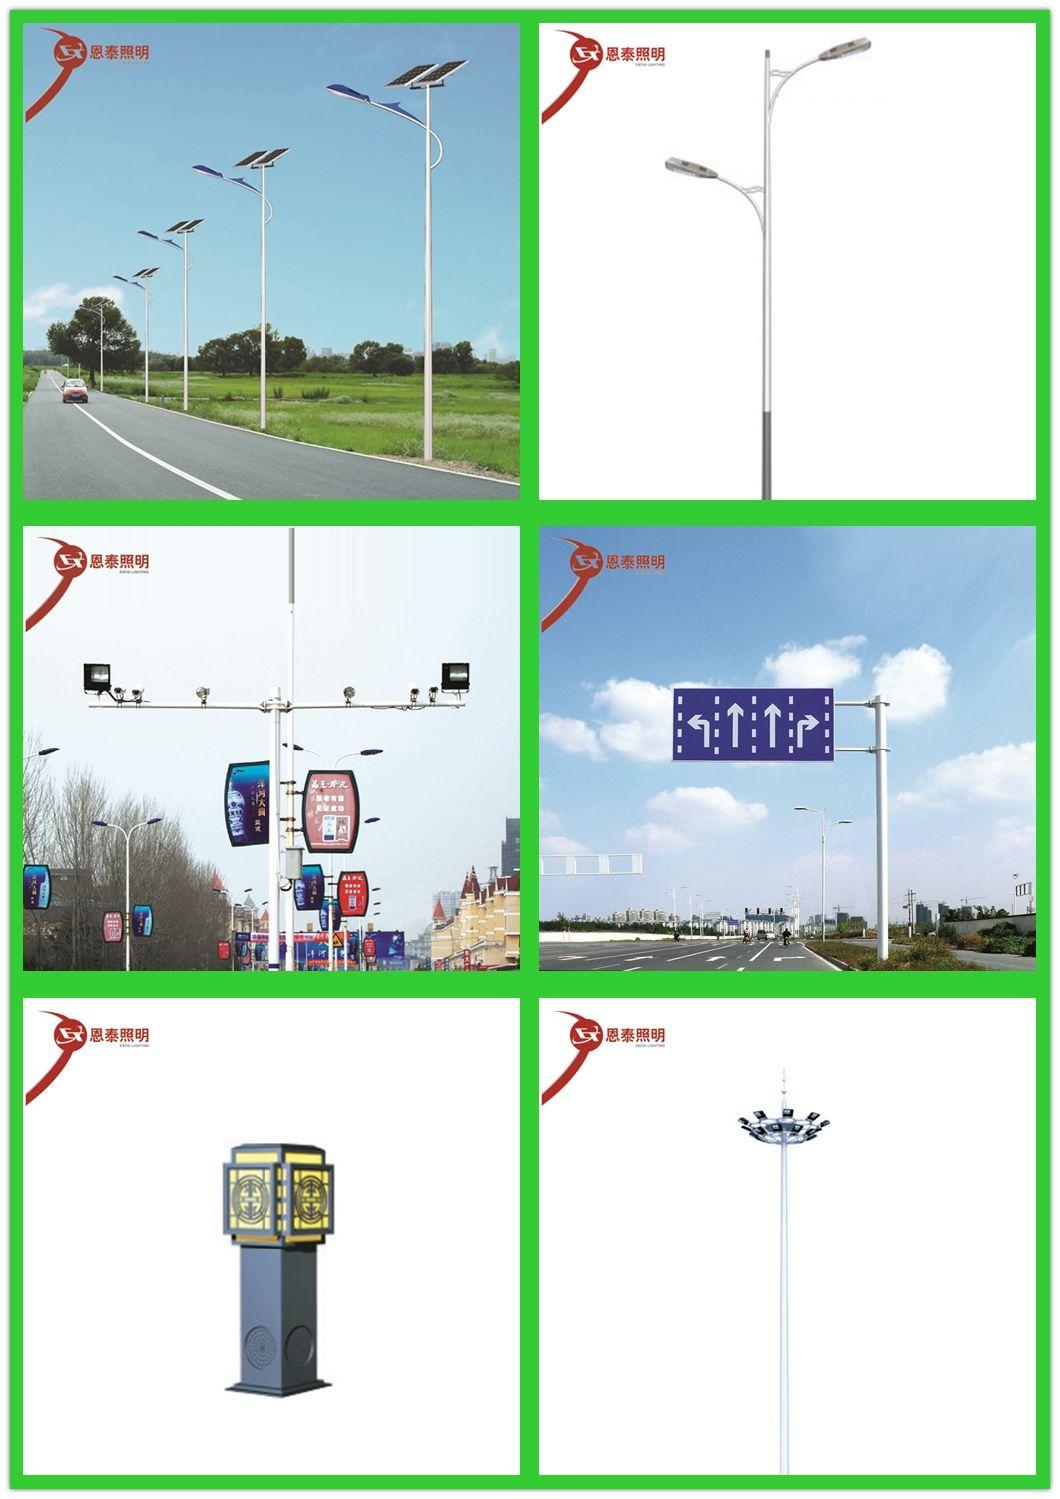 All in One Integrated Solar Street Light Pole for All in One Light 100W